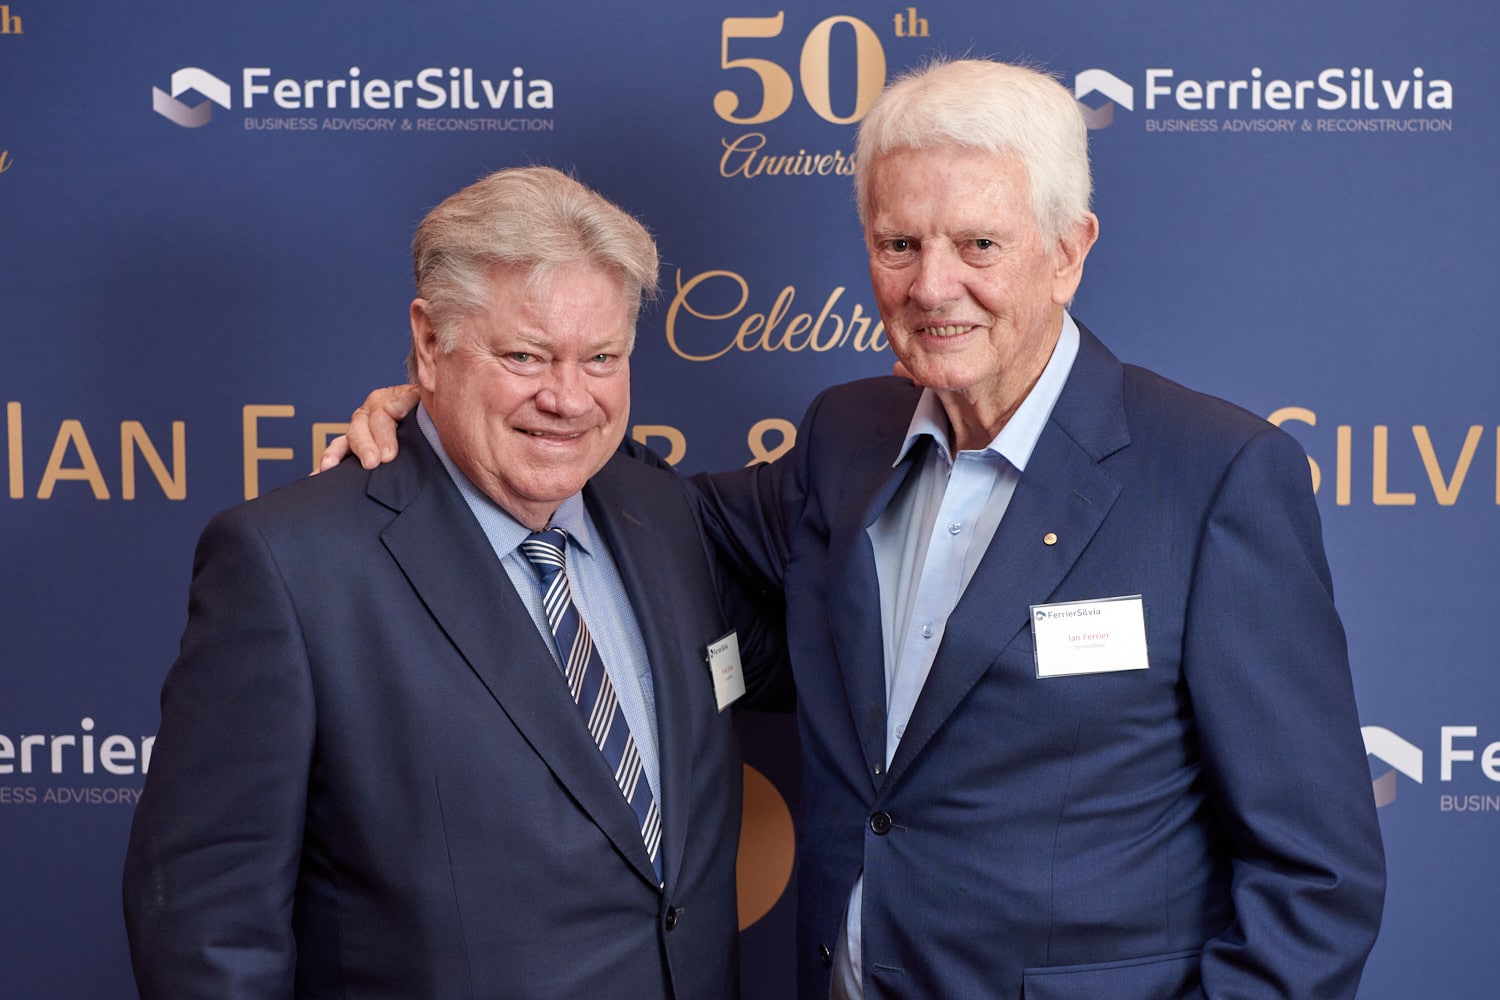 Two business men posing for 50th Business Anniversary Event photo